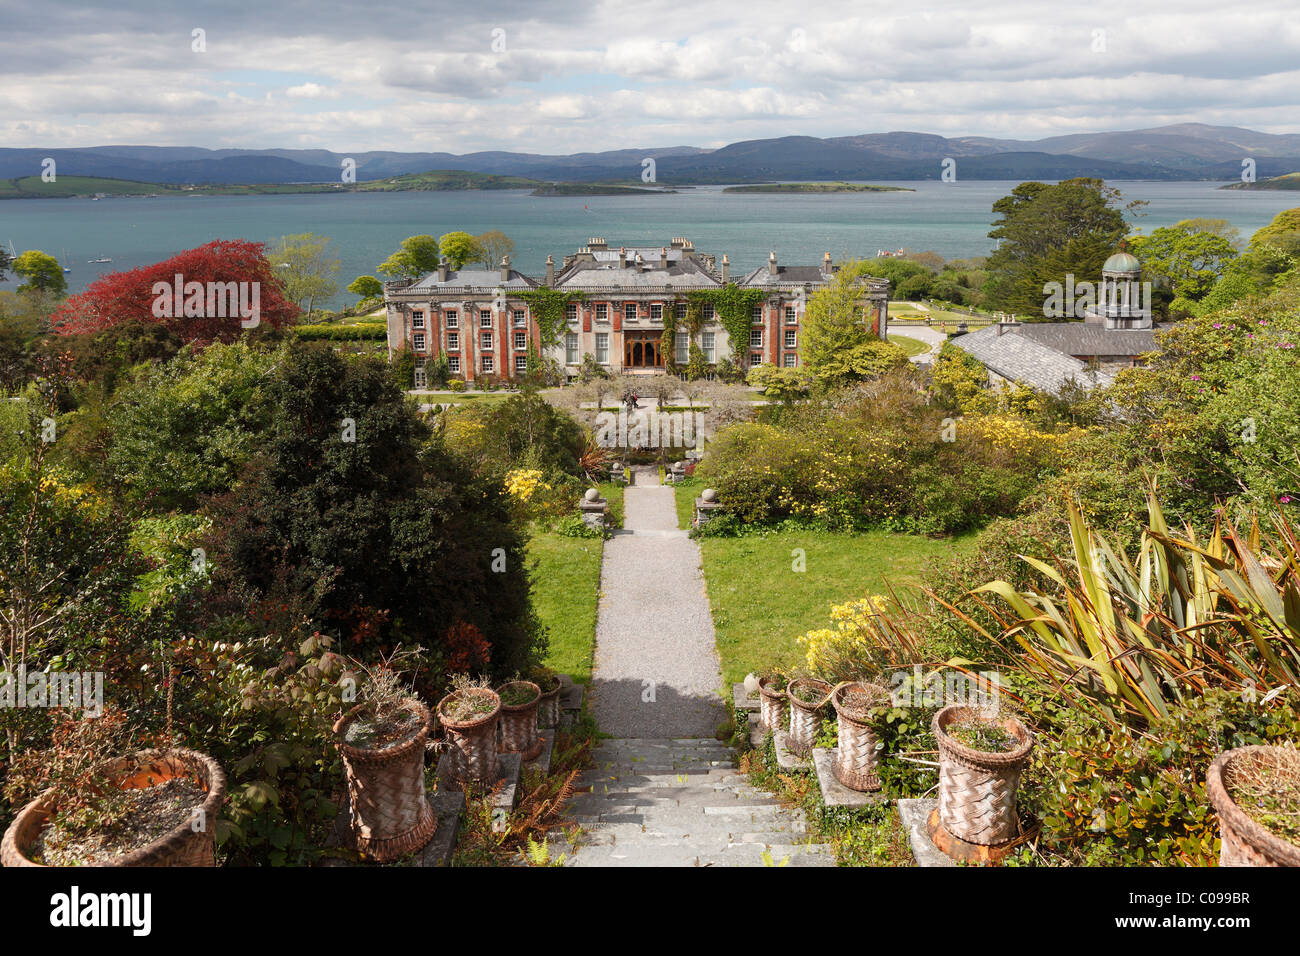 Bantry House, West Cork, Republic of Ireland, British Isles, Europe Banque D'Images